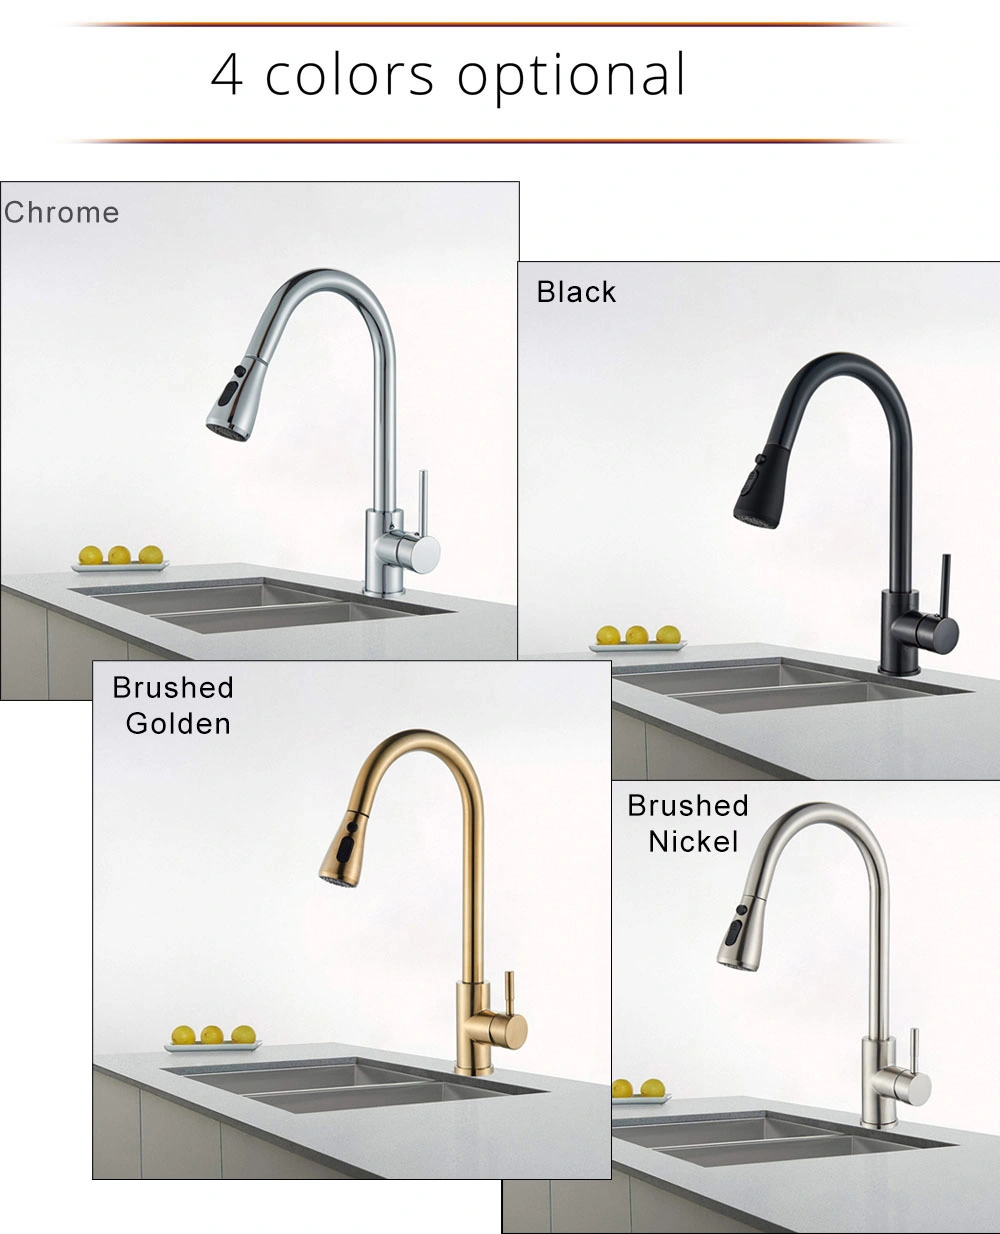 Brass Pull Down Sprayer Kitchen Faucet Black Sink Faucet with Pull out Sprayer Single Hole and 3 Hole Deck Mount Single Handle Copper Kithen Faucet